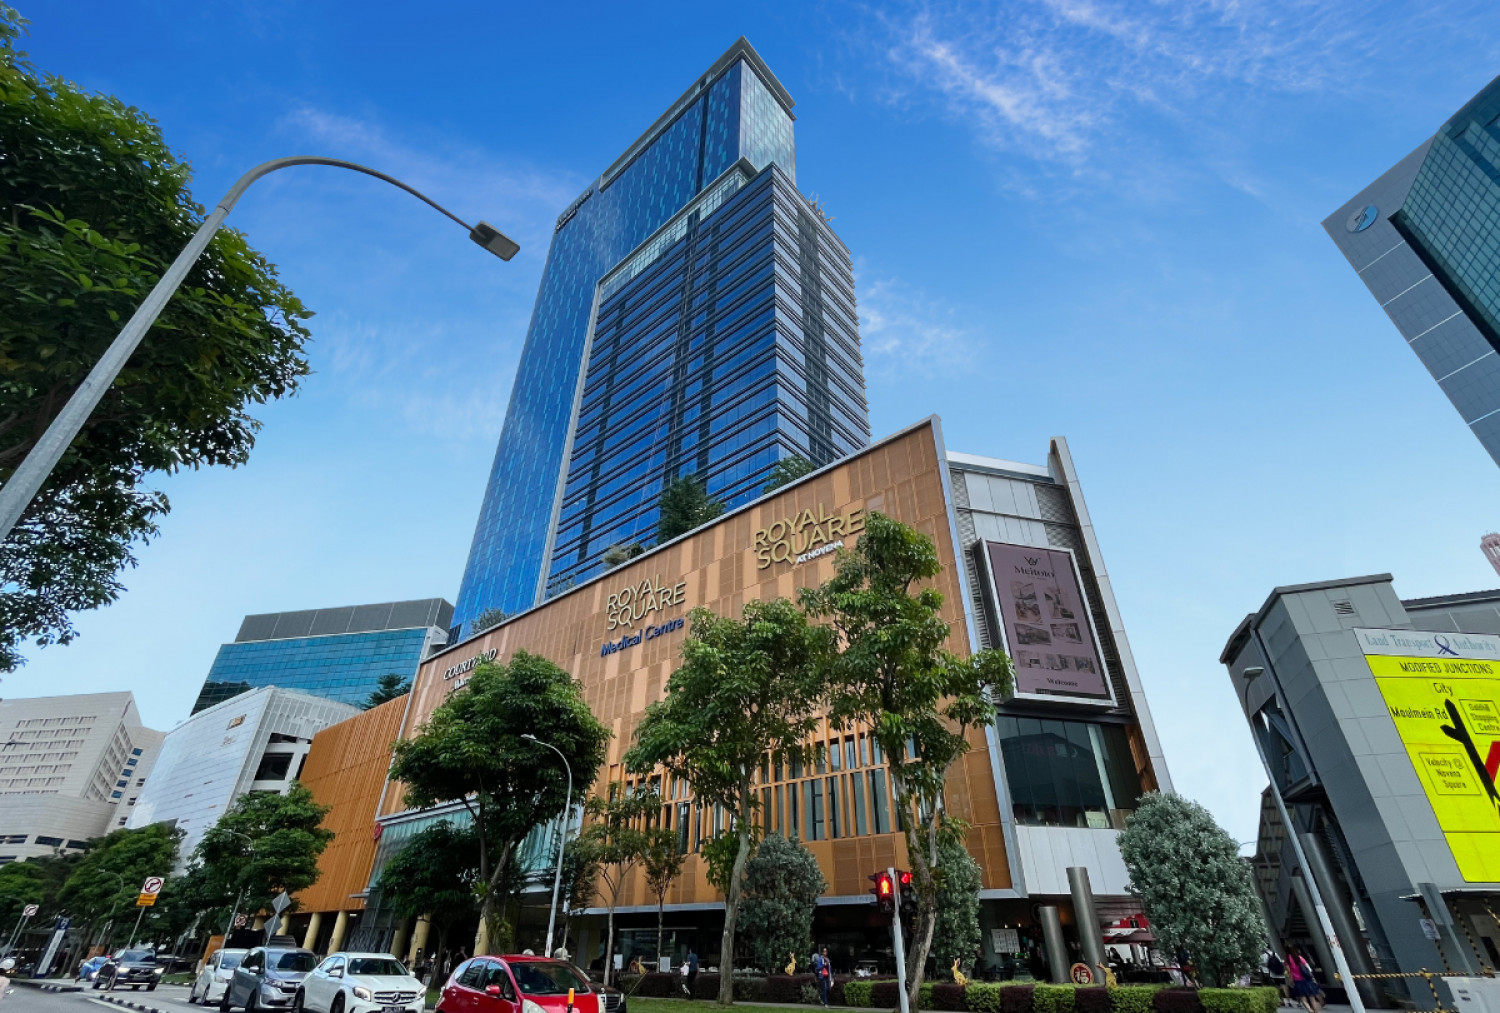 Portfolio of strata retail units at Royal Square for sale at $28 mil - Property News